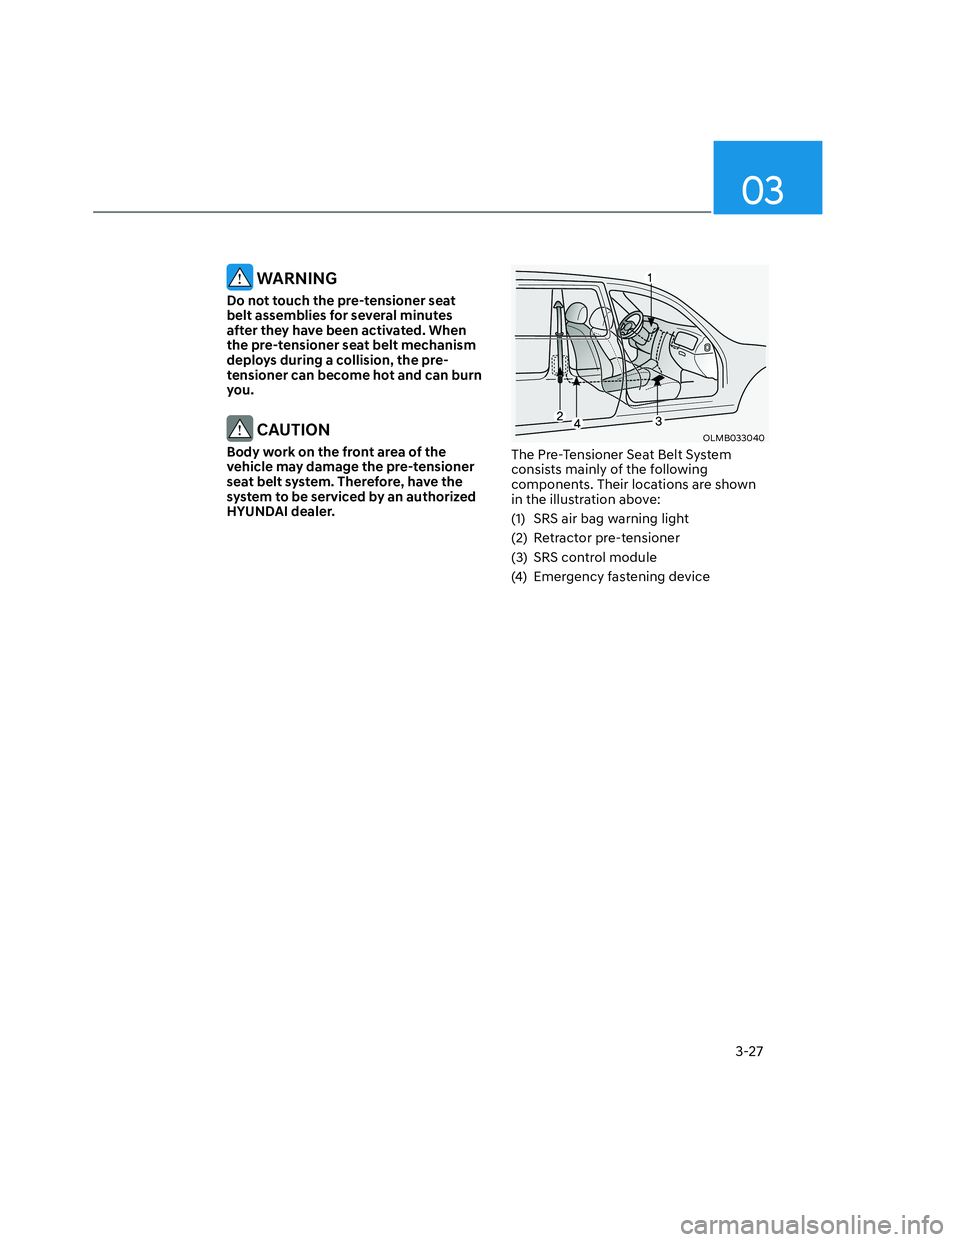 HYUNDAI SANTA CRUZ 2022  Owners Manual 03
3-27
 WARNING
Do not touch the pre-tensioner seat 
belt assemblies for several minutes 
after they have been activated. When 
the pre-tensioner seat belt mechanism 
deploys during a collision, the 